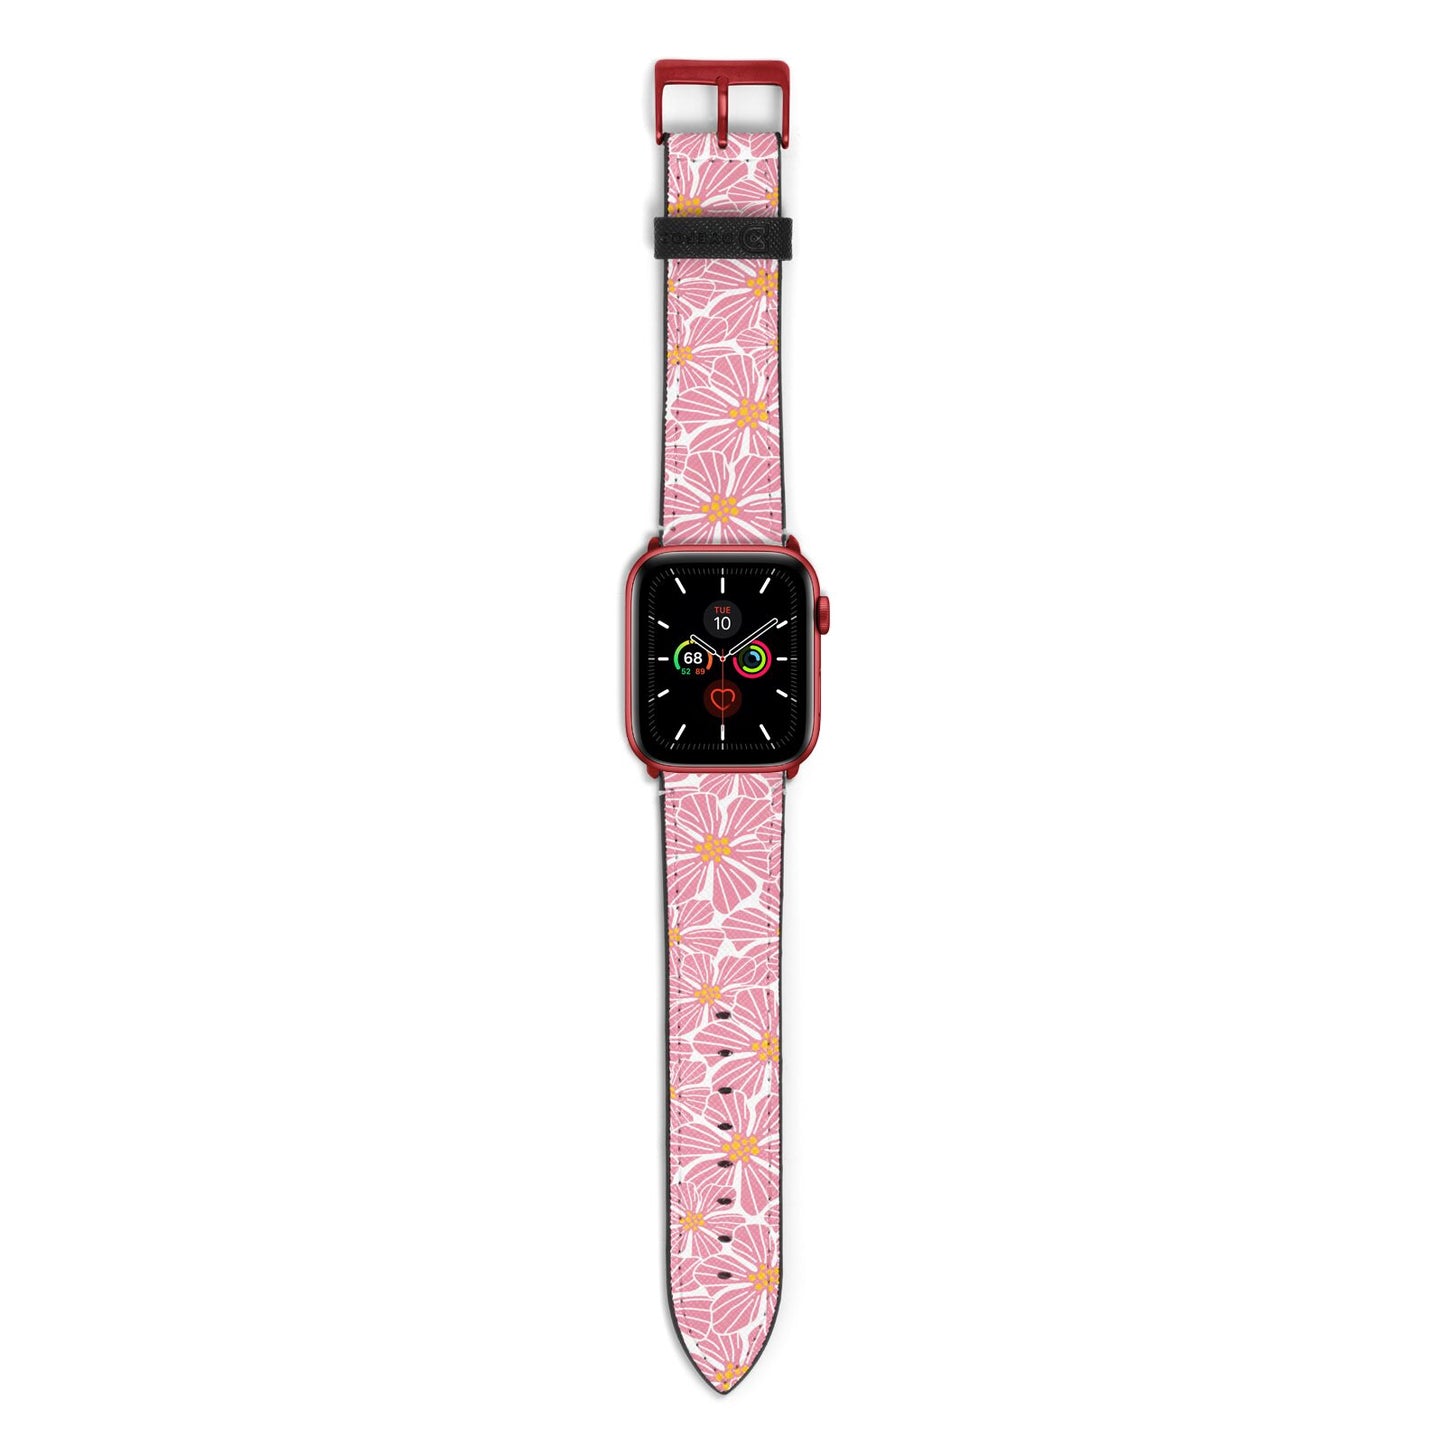 Pink Flowers Apple Watch Strap with Red Hardware